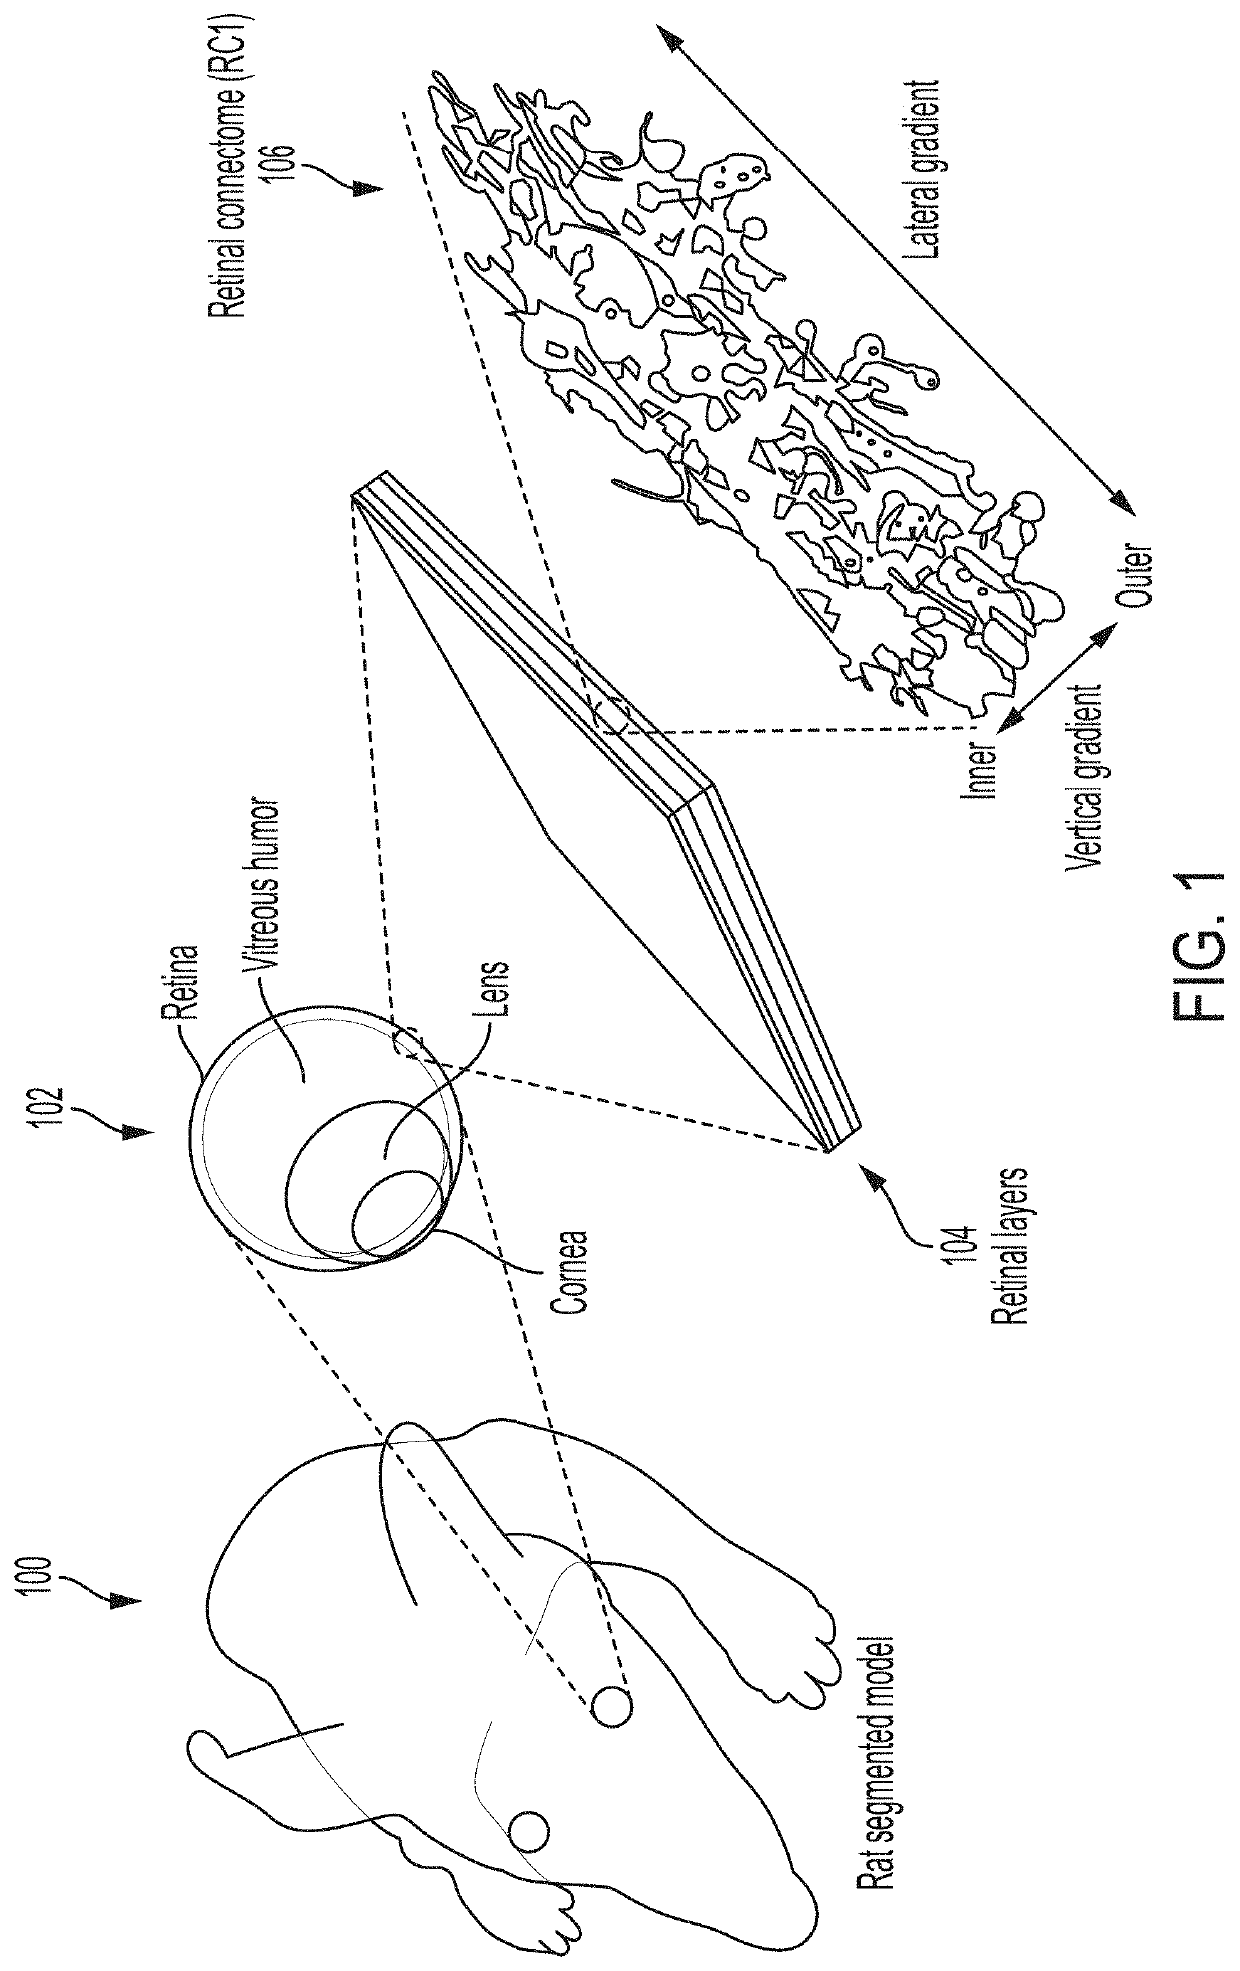 Bioelectronic lens (e-lens) system for electrical stimulation and neuroprotection of the retina